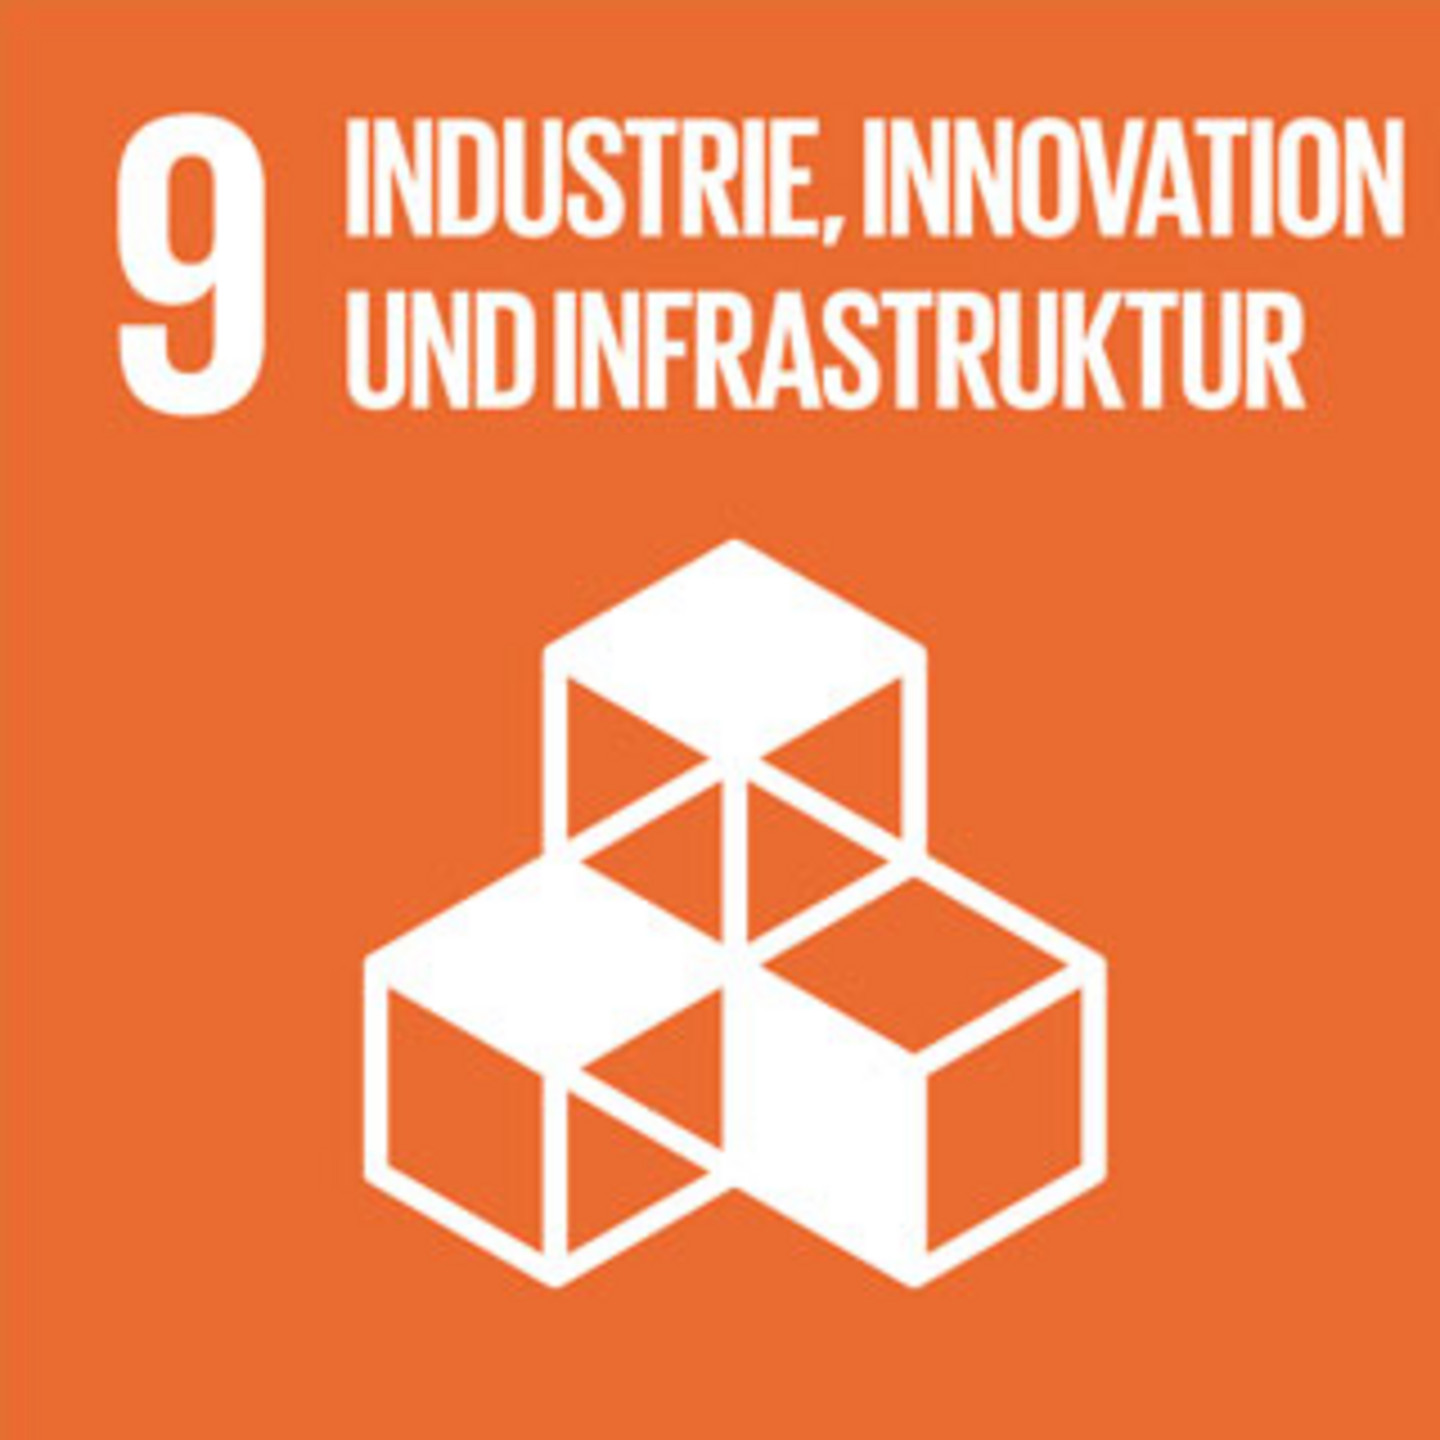  An orange background with the writing "Industry, Innovation and Infrastructure".